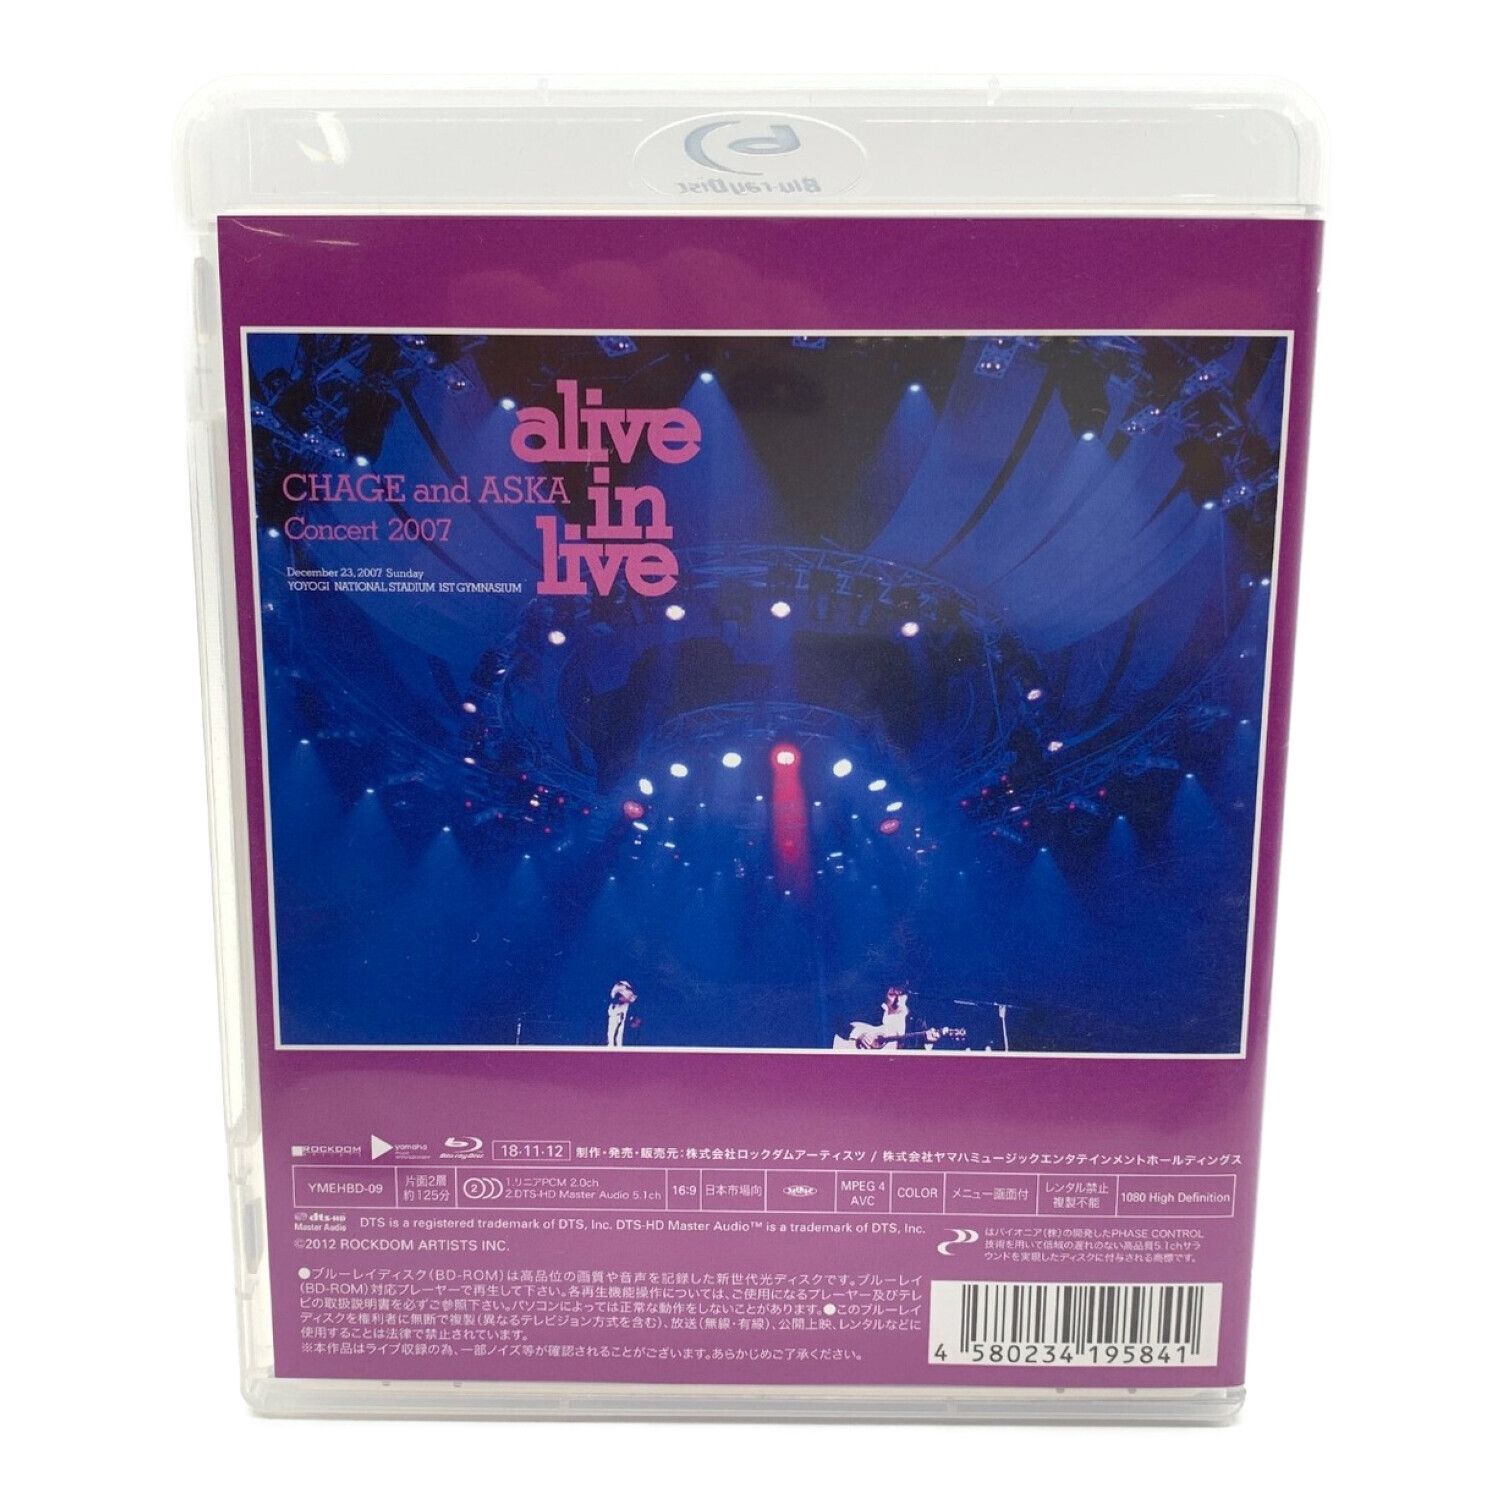 CHAGE and ASKA Concert 2007 alive in live Blu-ray ブルーレイ